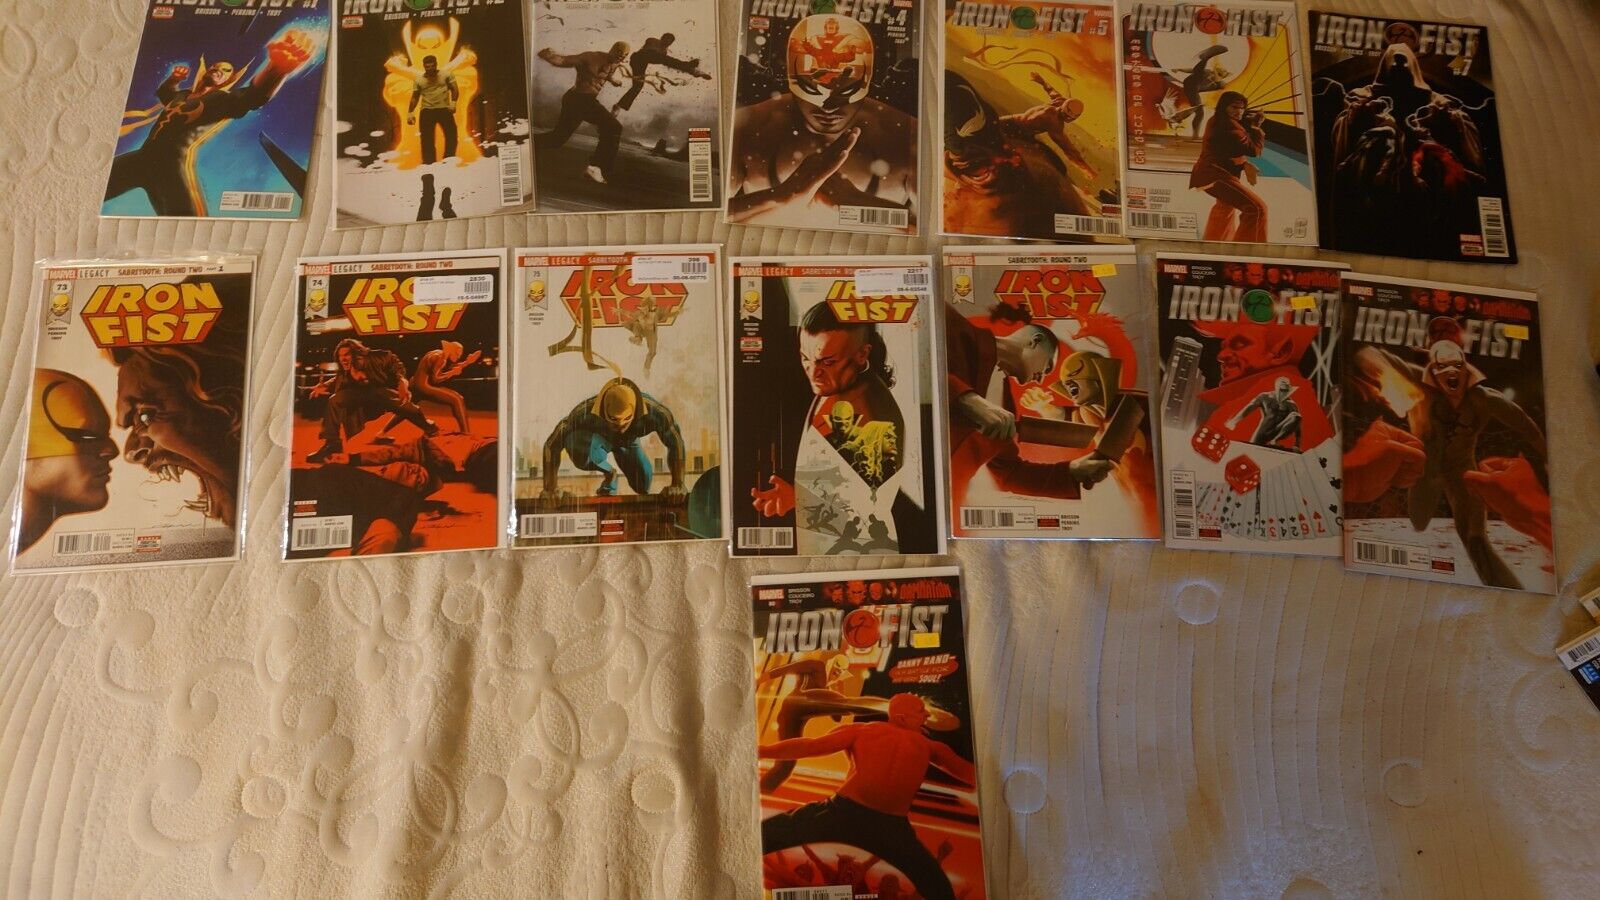 Marvel 2017 all 15 issues IRON FIST  1 2 3 4 5 6 7 73 74 75 76 77 78 79 80